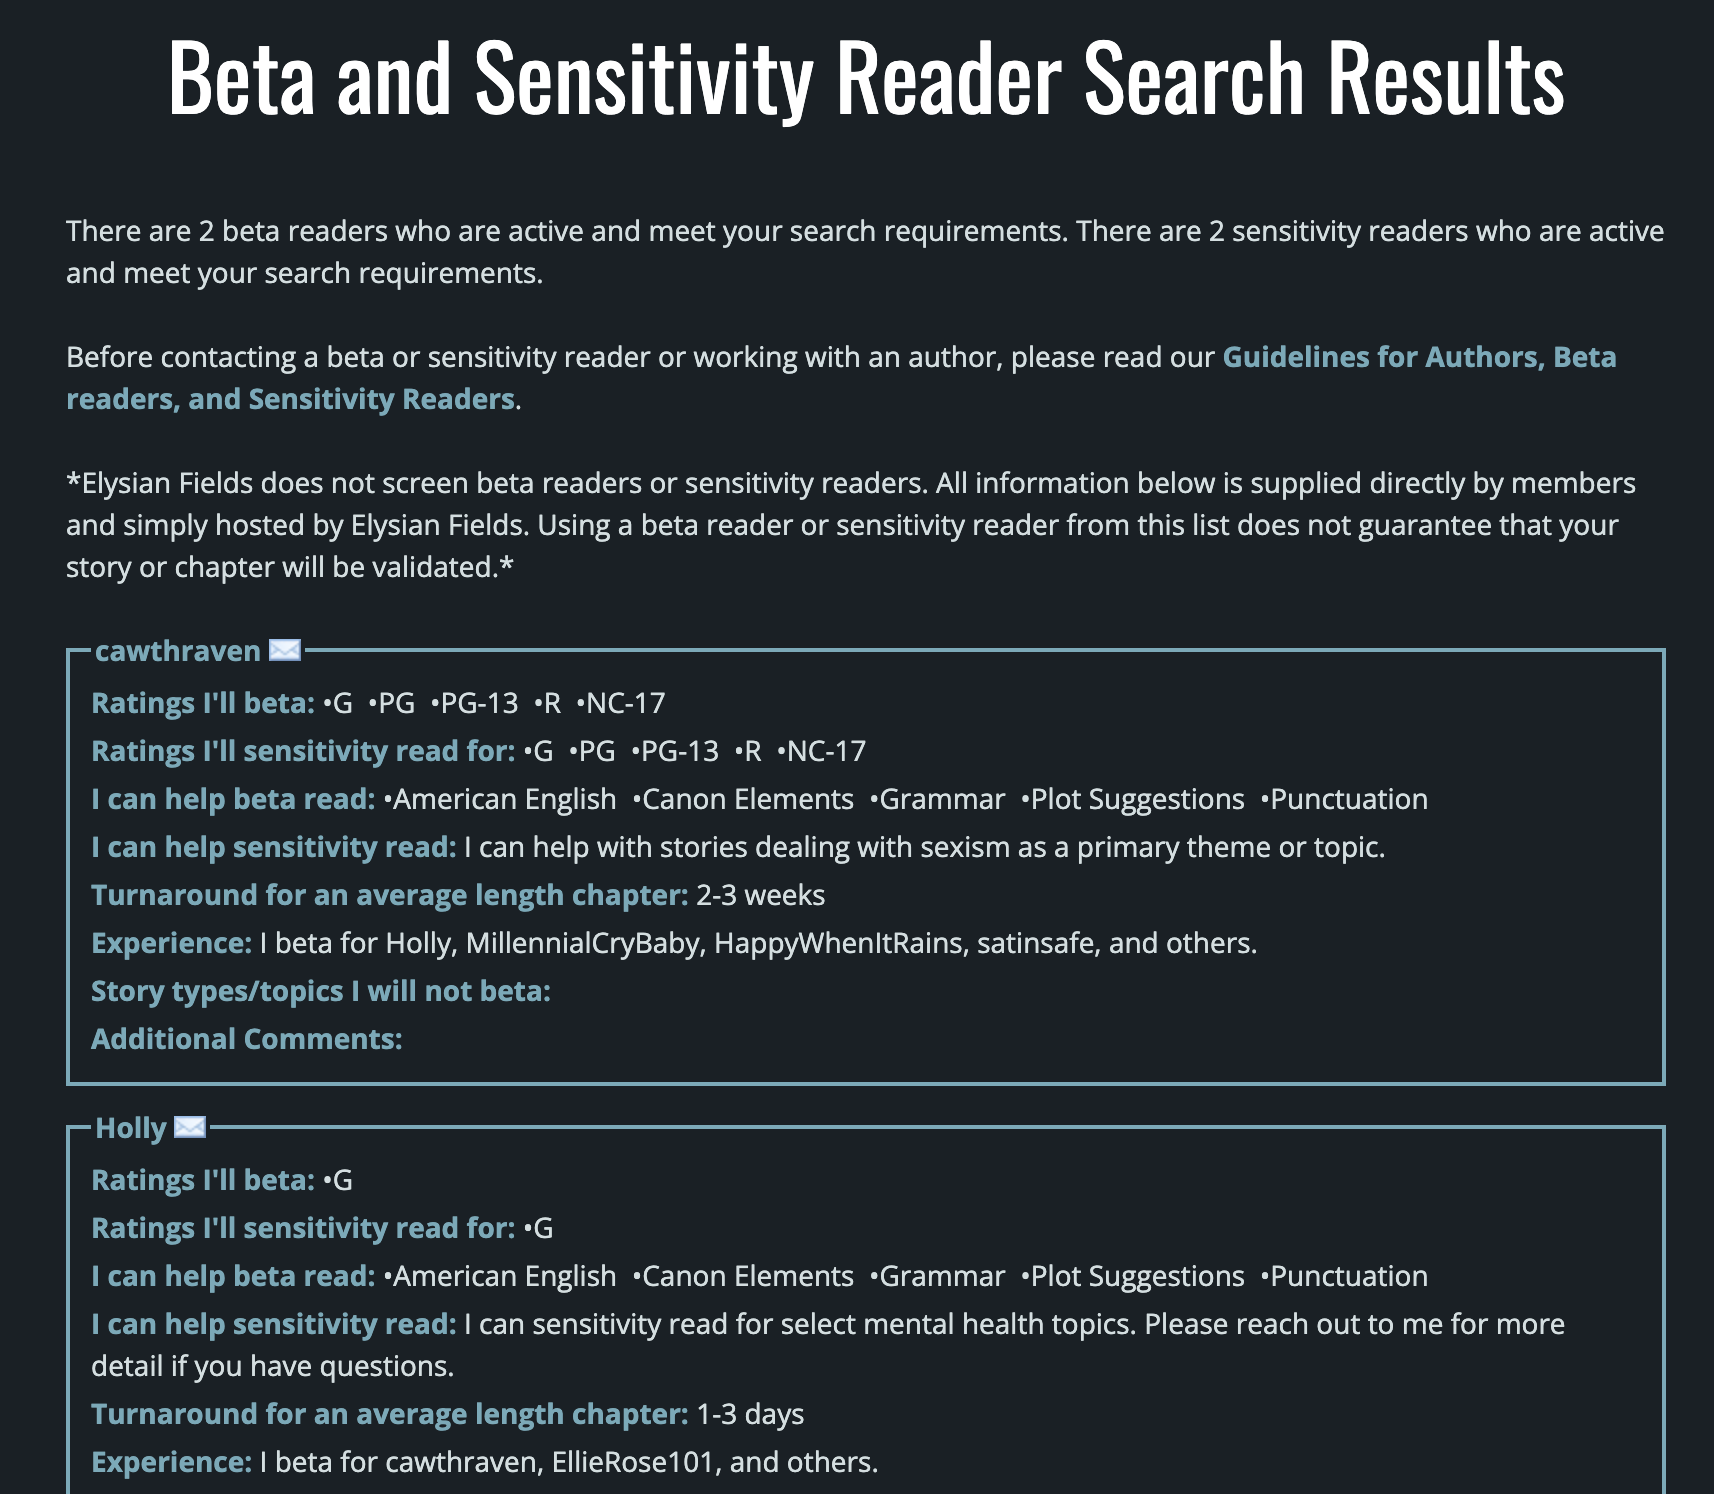 Beta and Sensitivity Reader Search Results